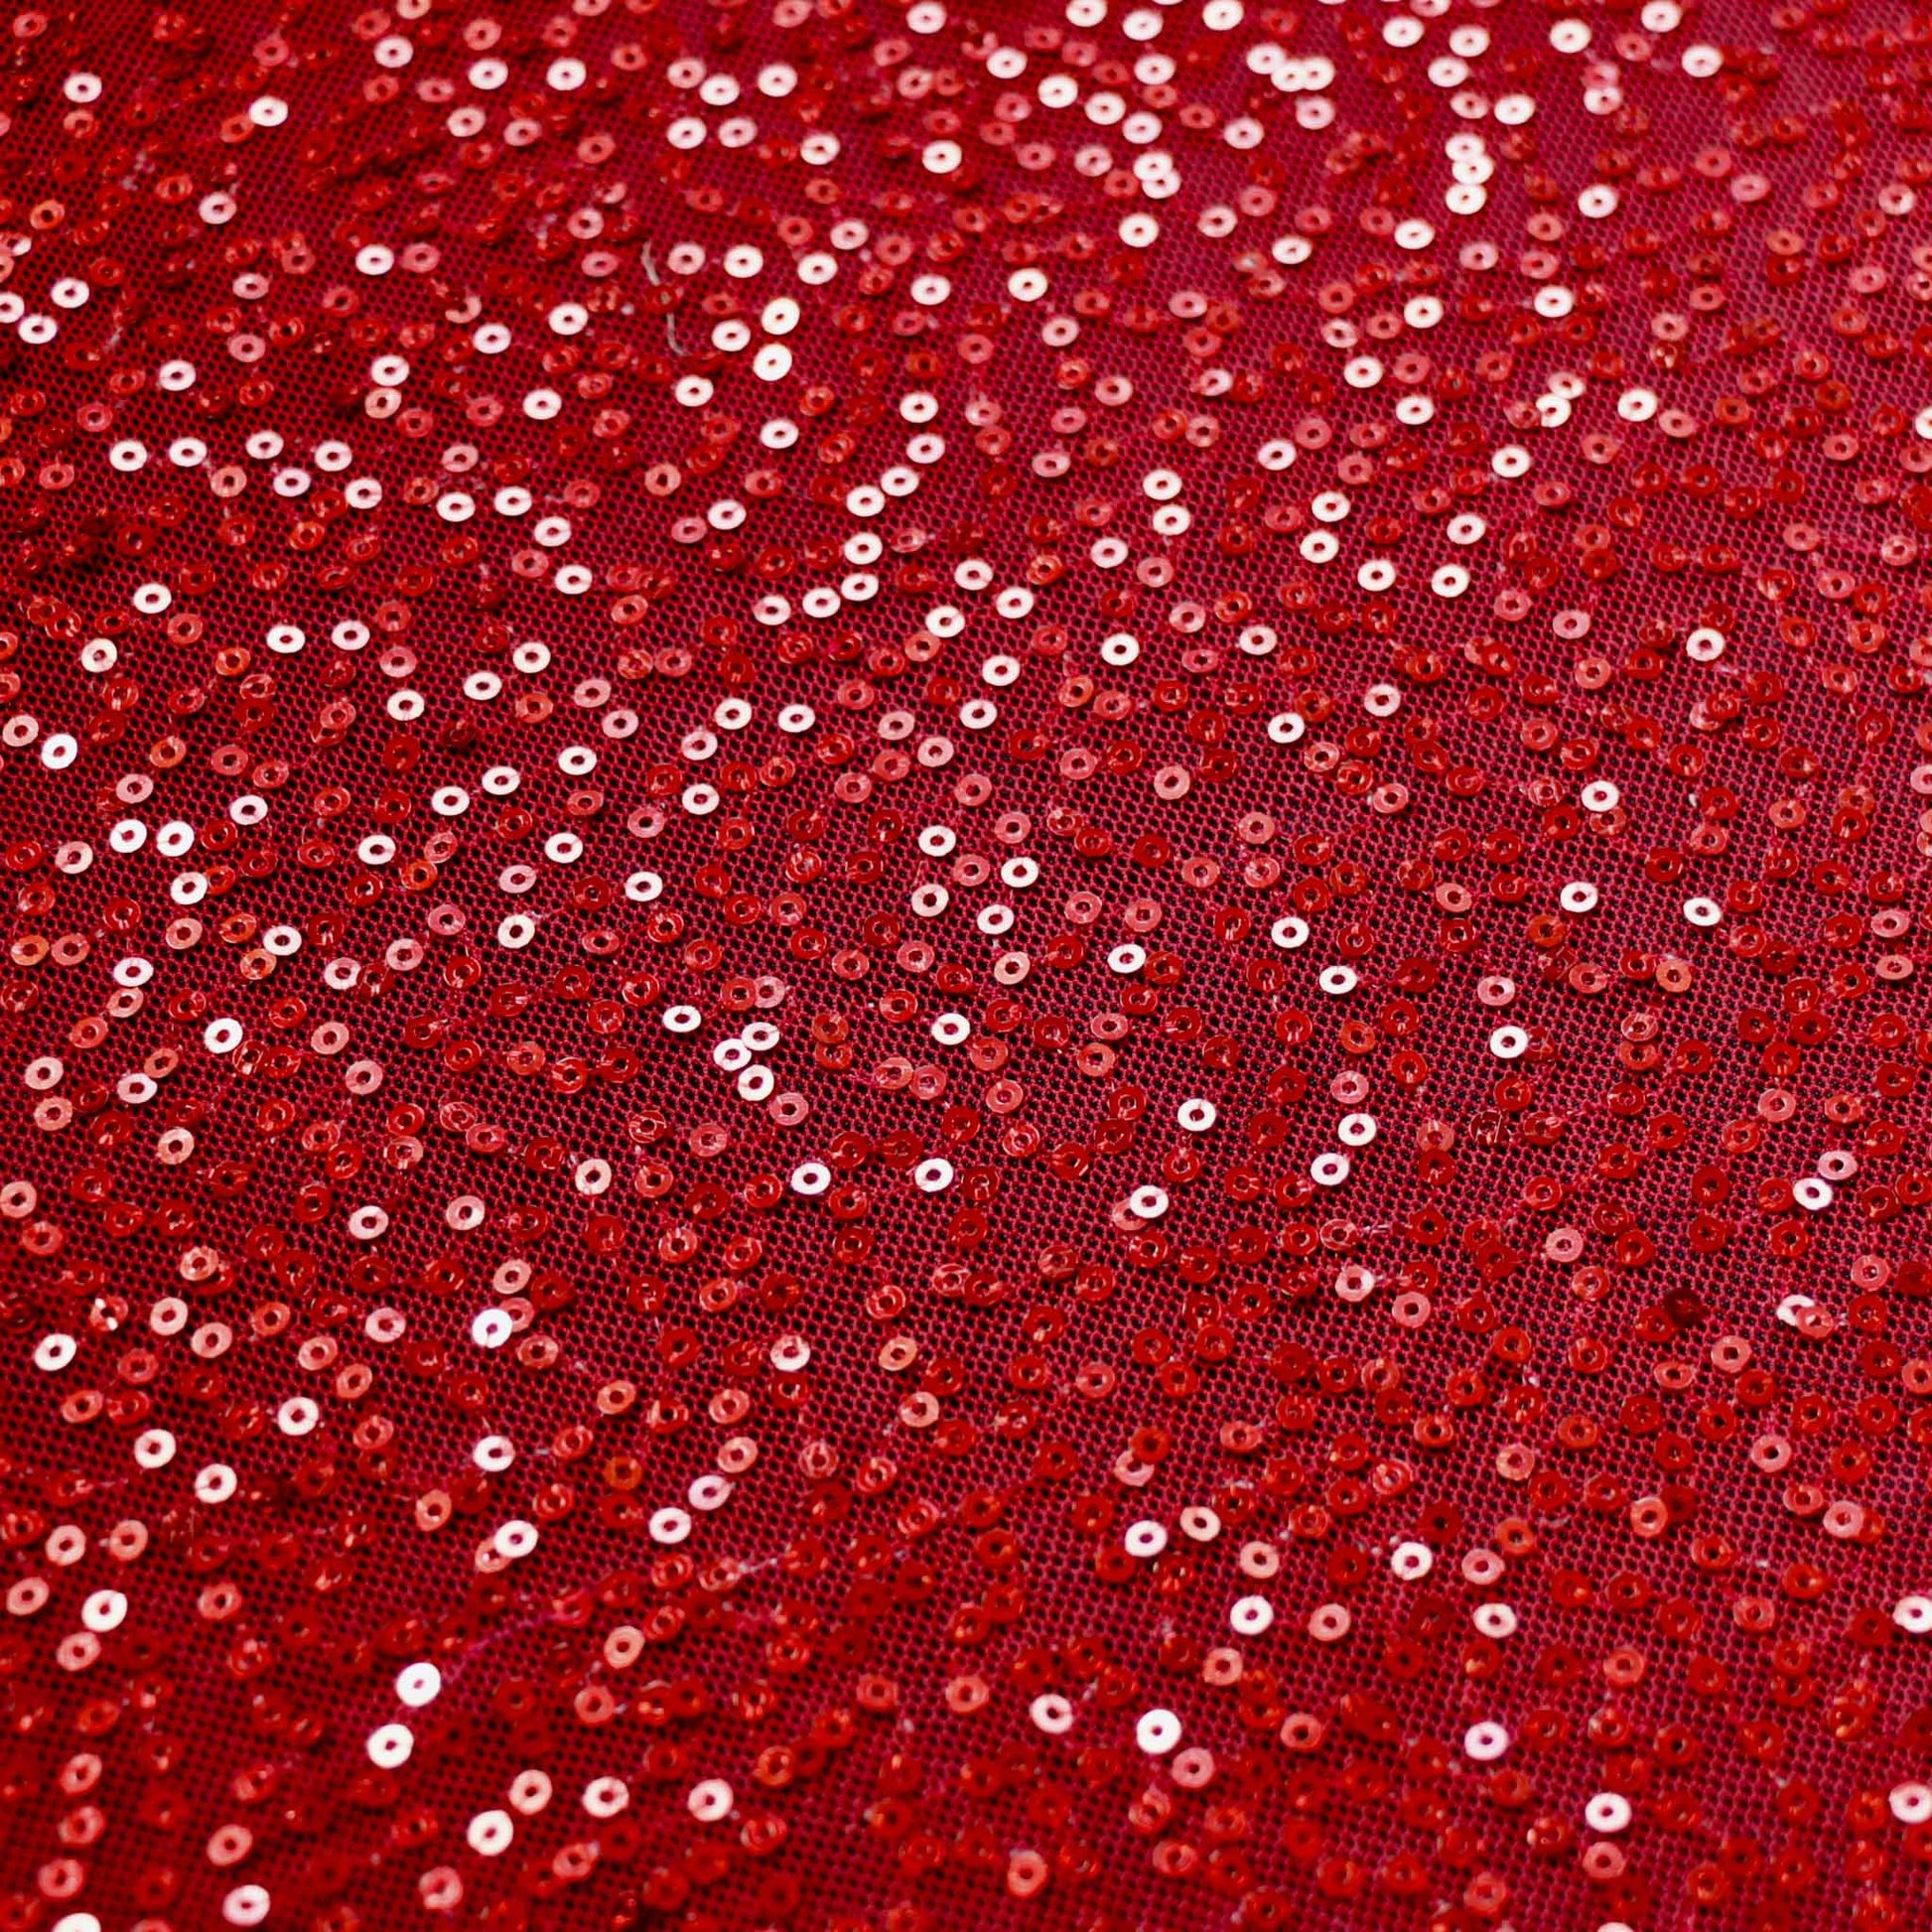 SEQUIN MESH FABRIC, Sewn on 3mm sequins, Red, Blue